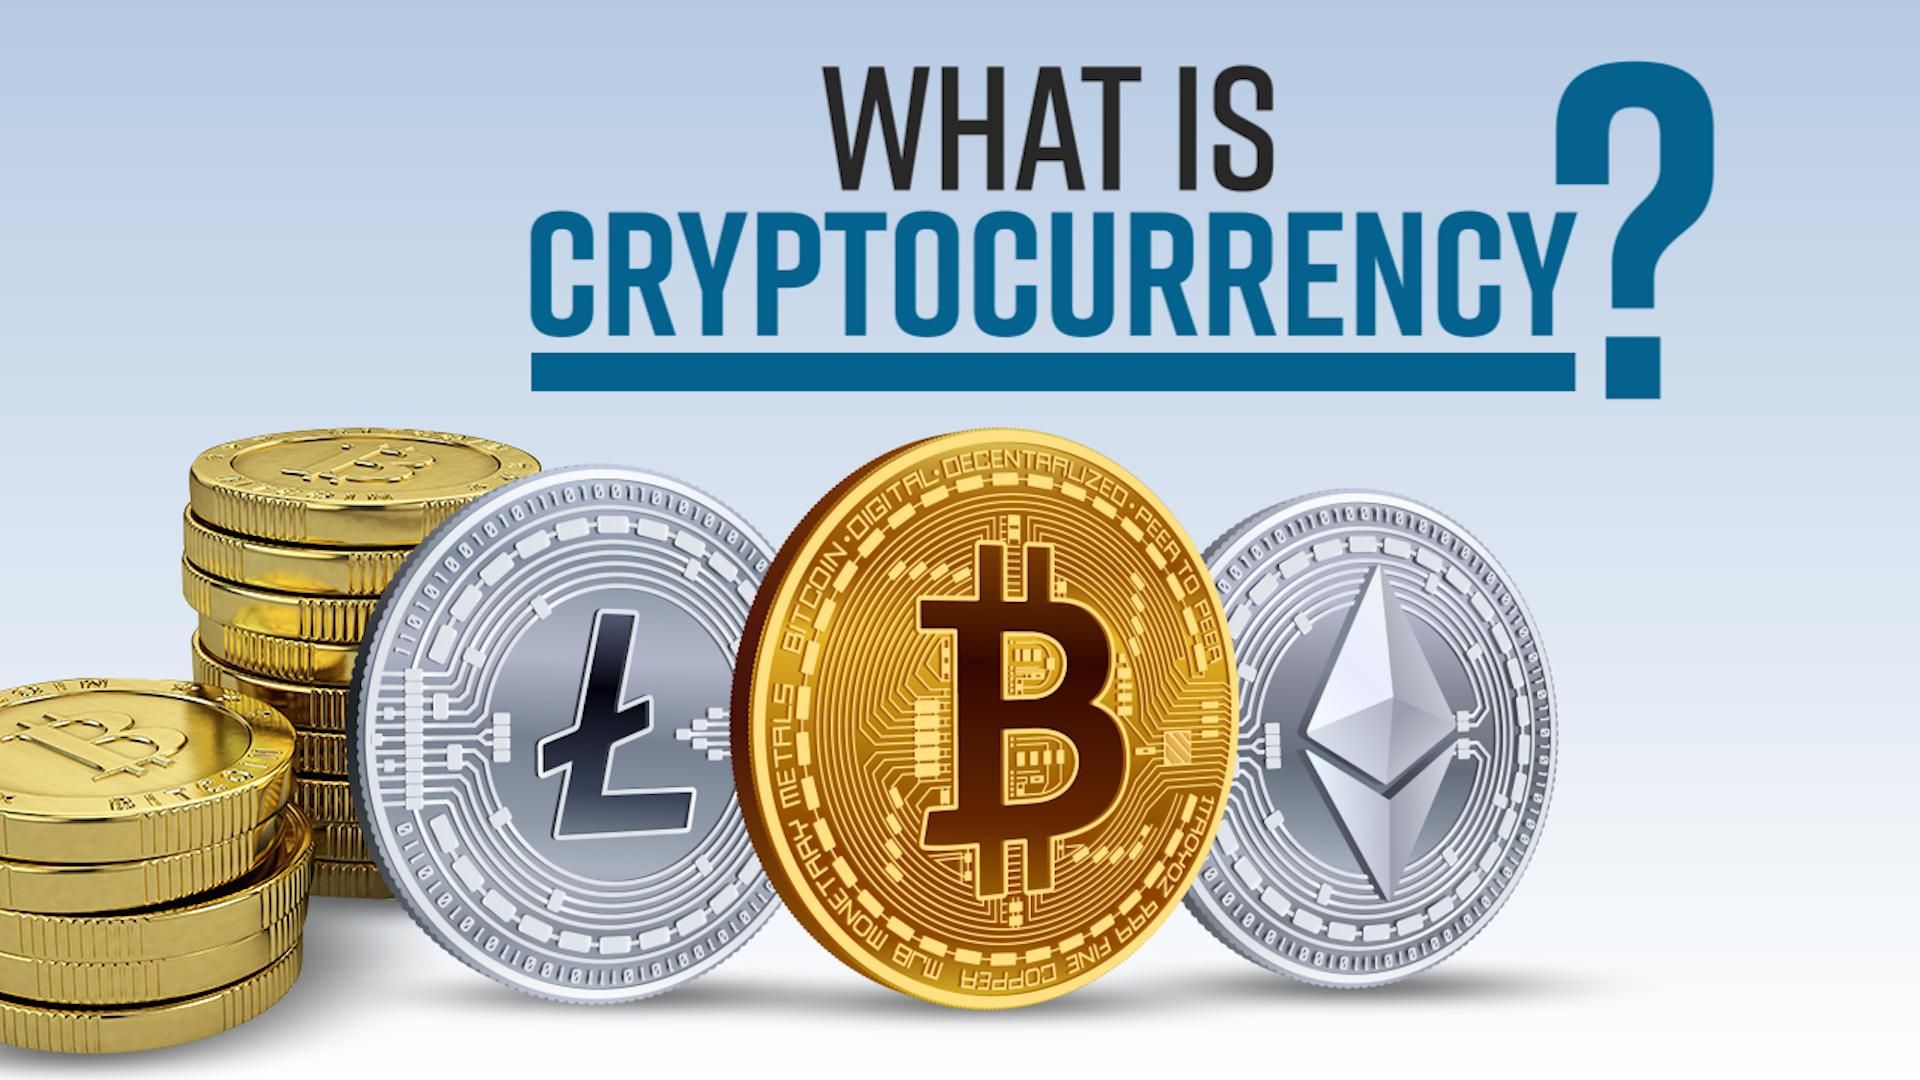 42 cryptocurrency